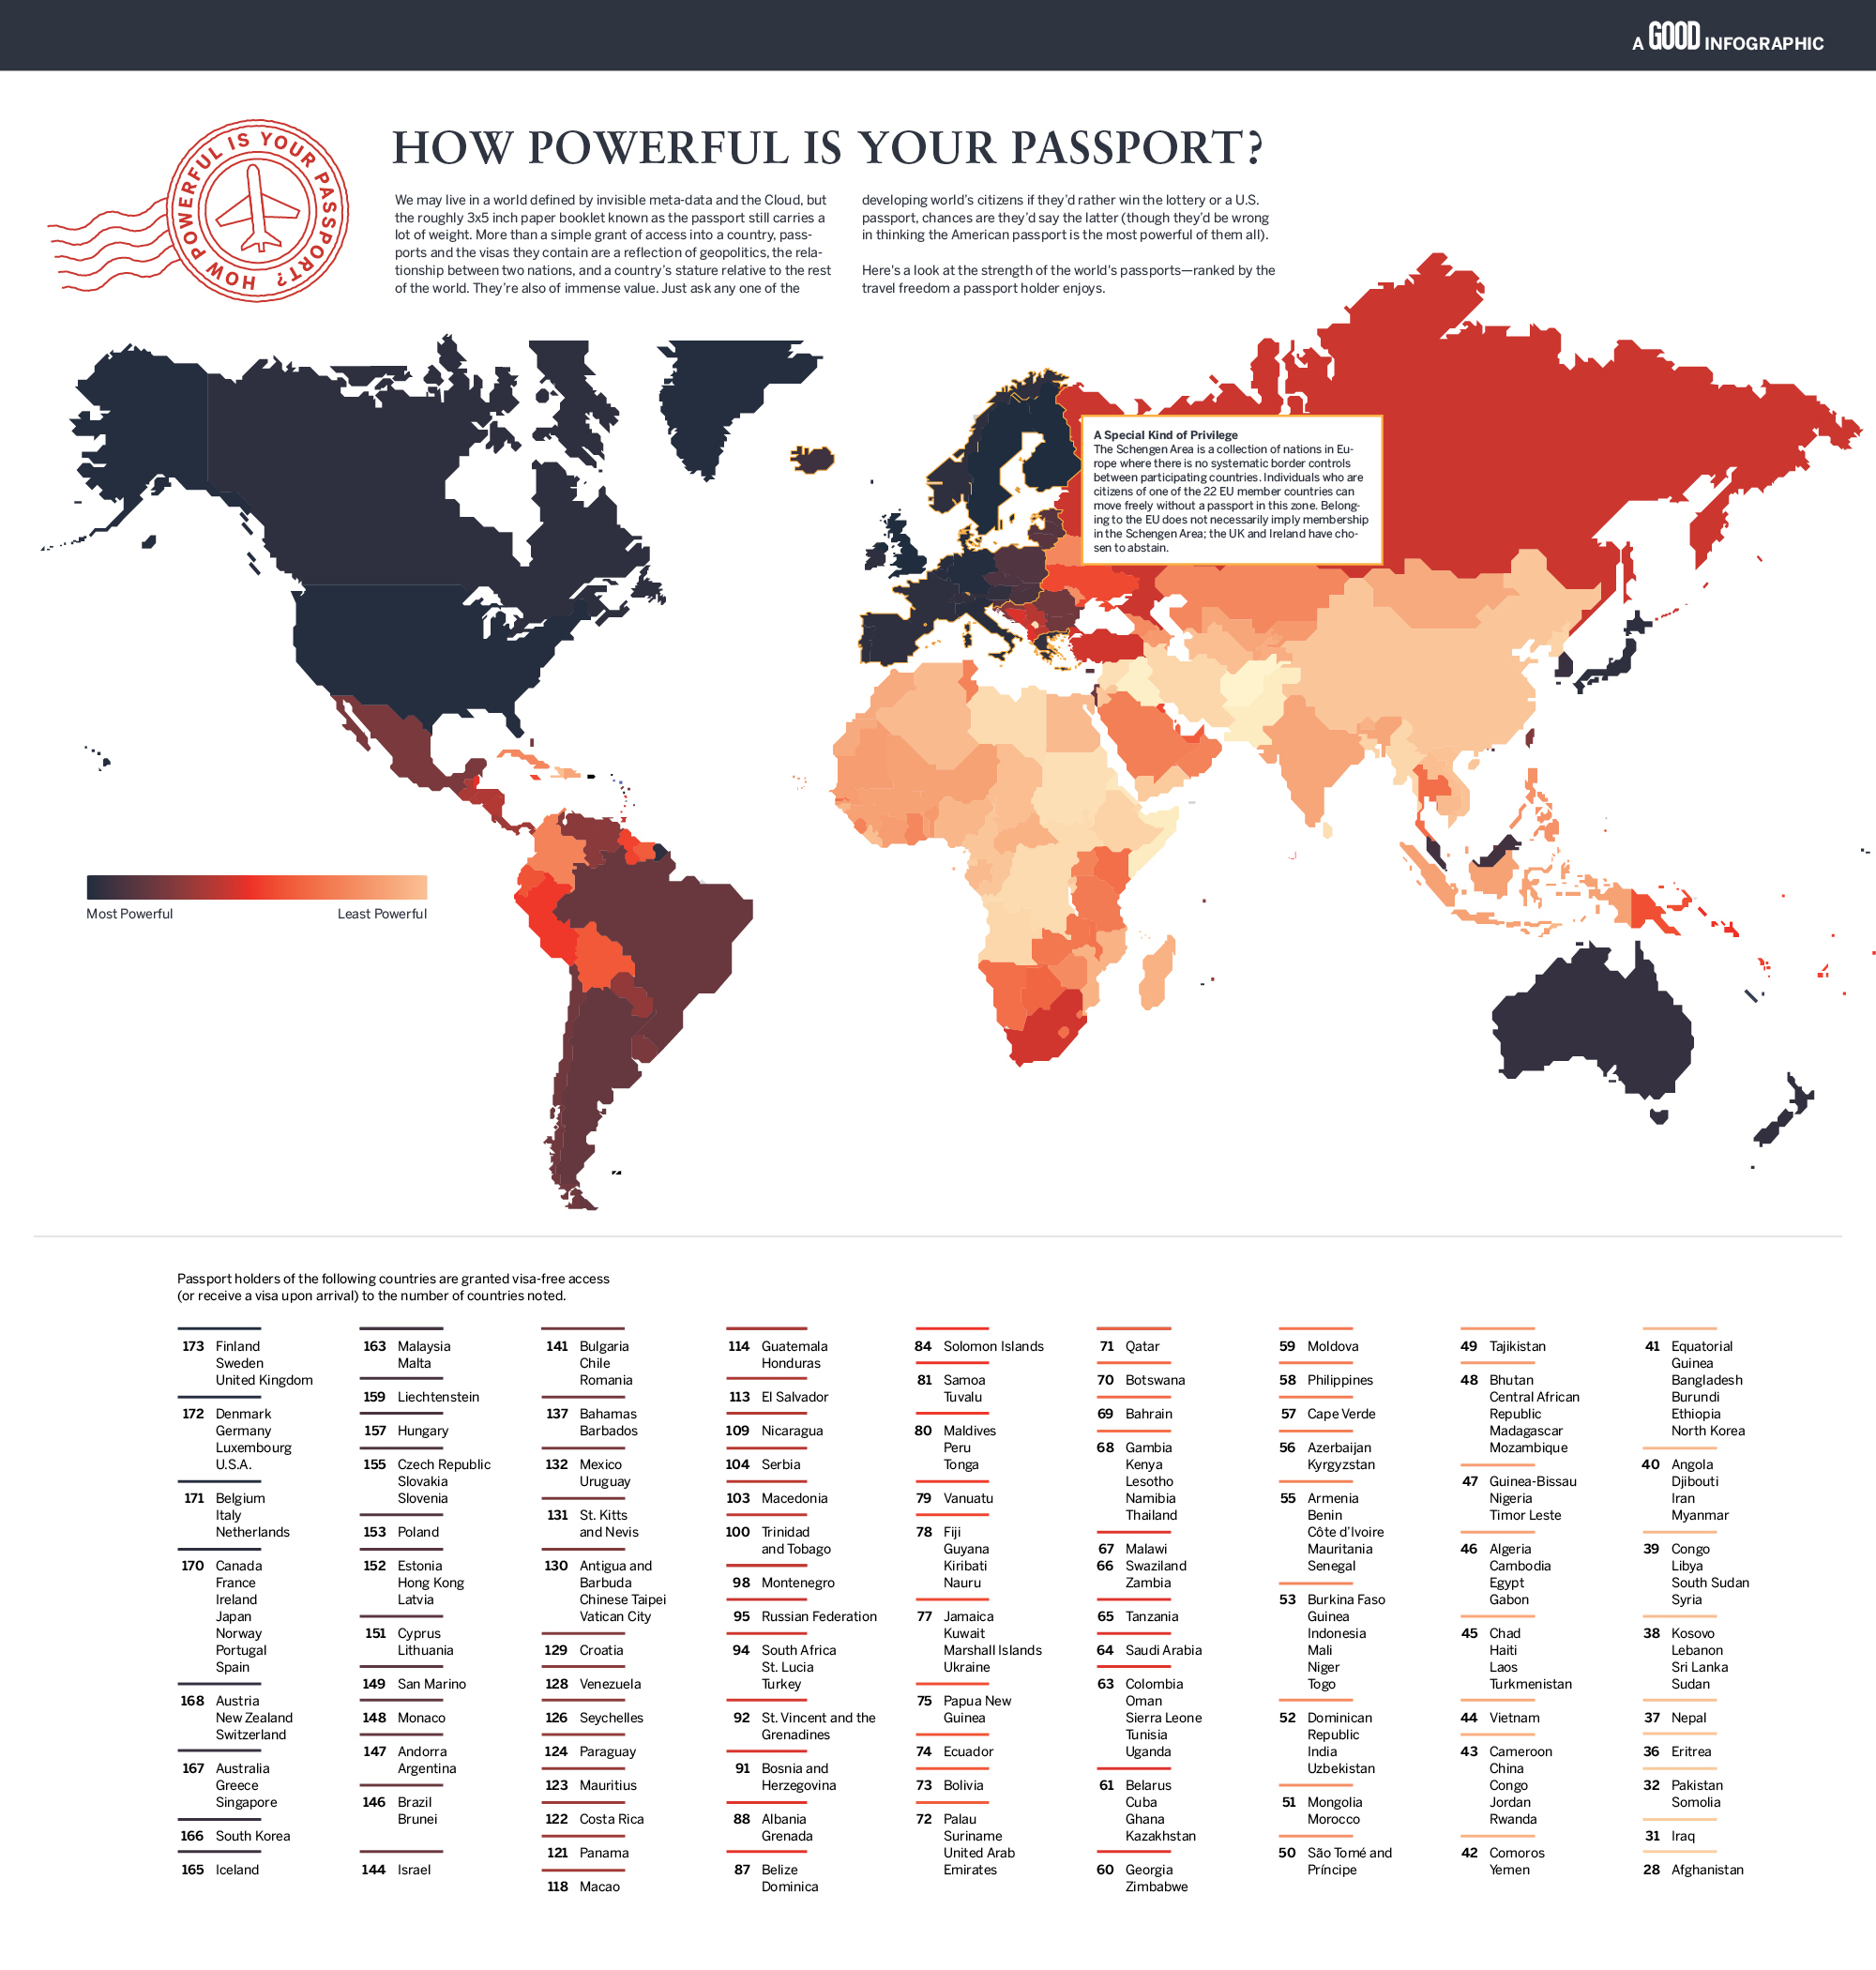 how powerfull your passport is